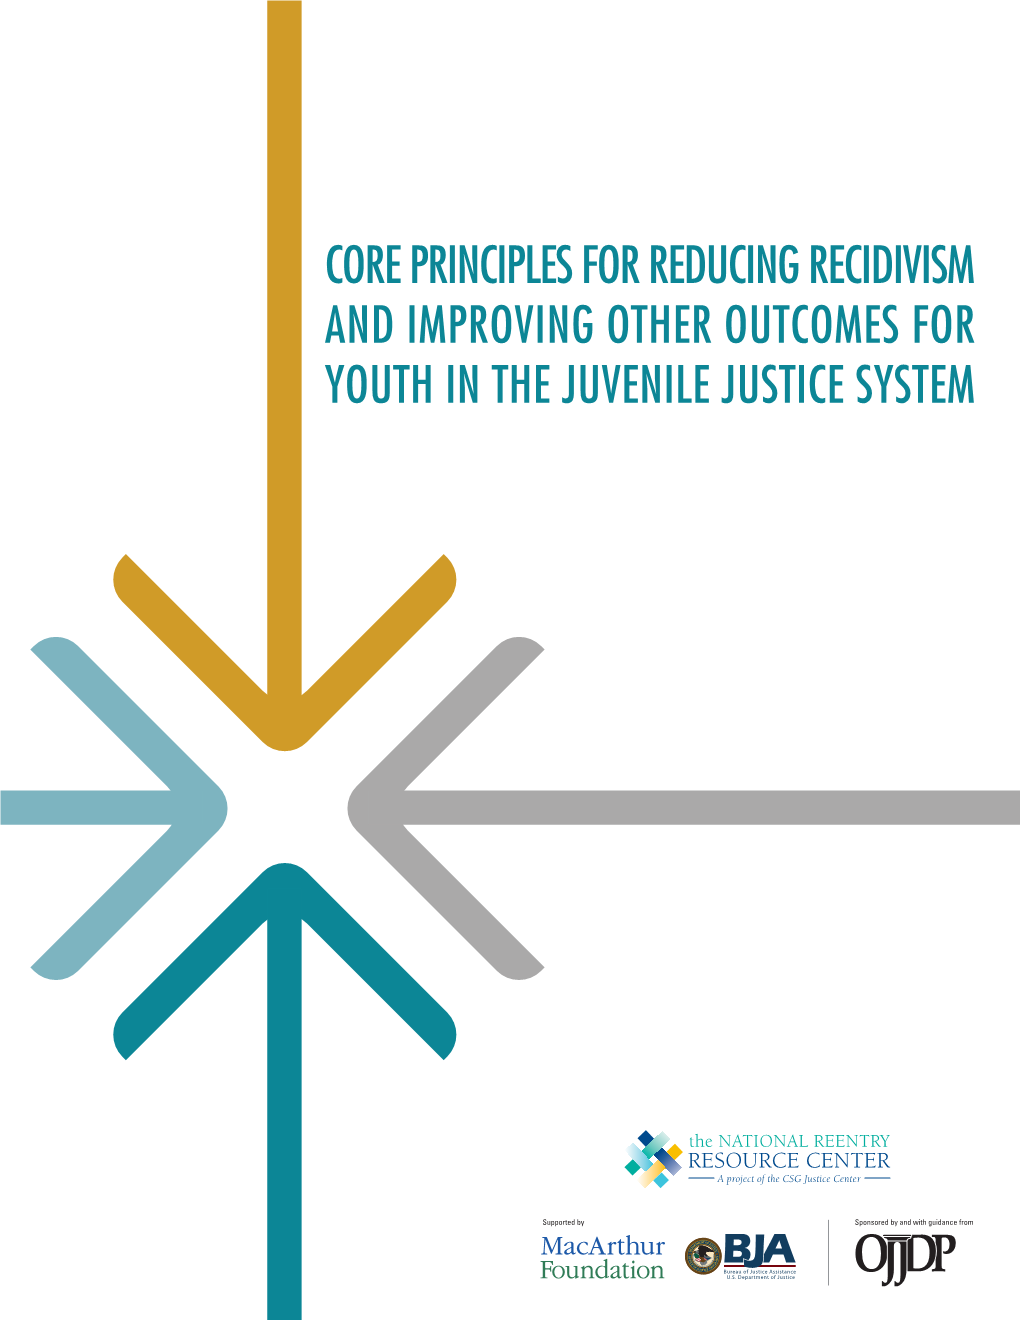 Core Principles for Reducing Recidivism and Improving Other Outcomes for Youth in the Juvenile Justice System